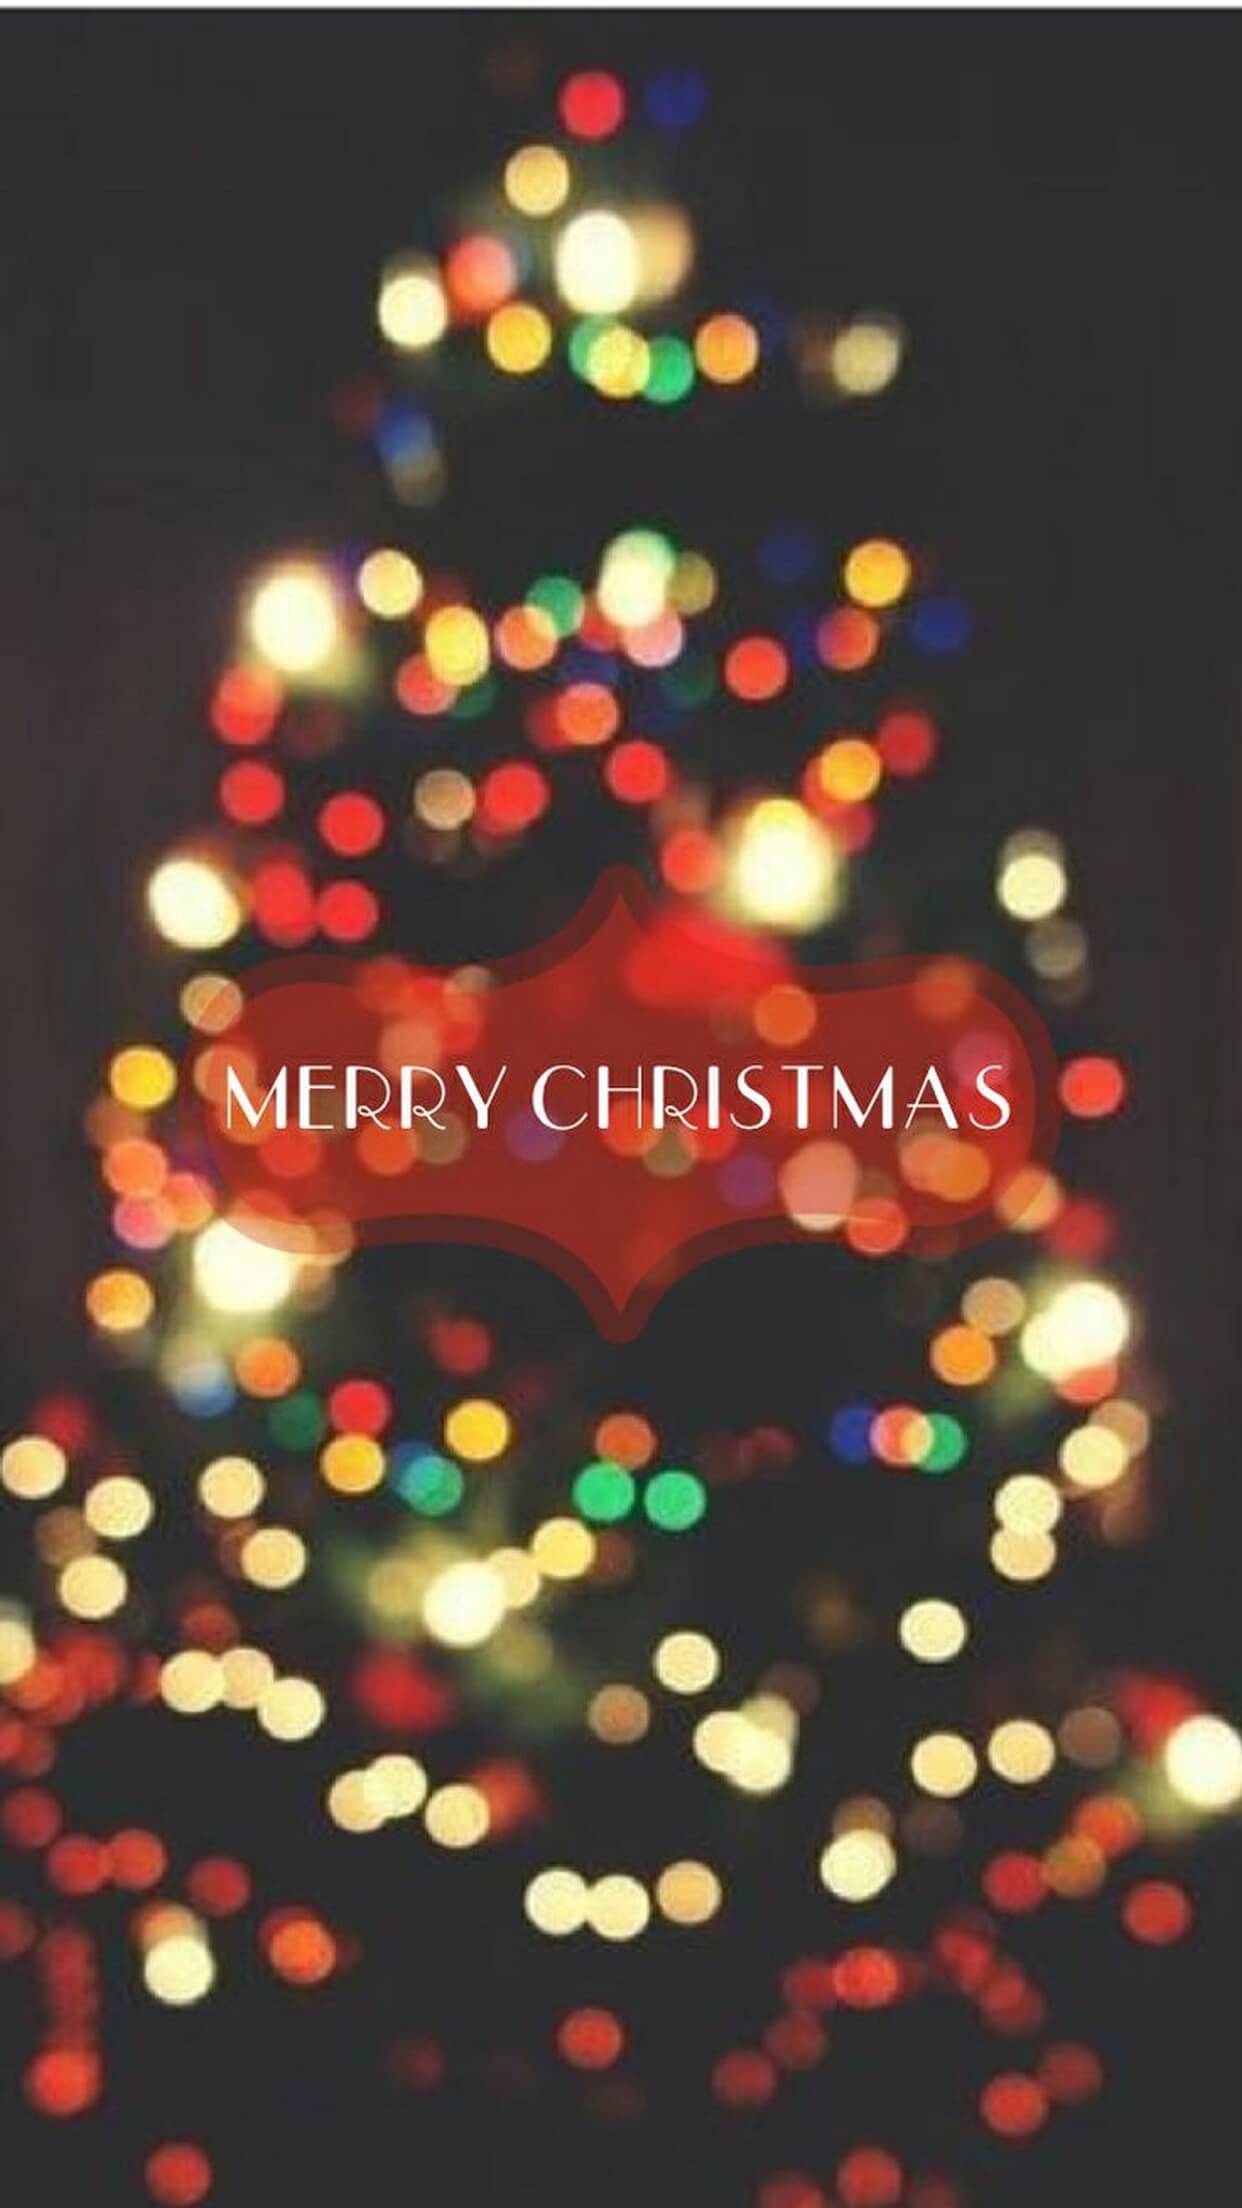 Christmas iPhone 5S Wallpaper Free Christmas iPhone 5S Background